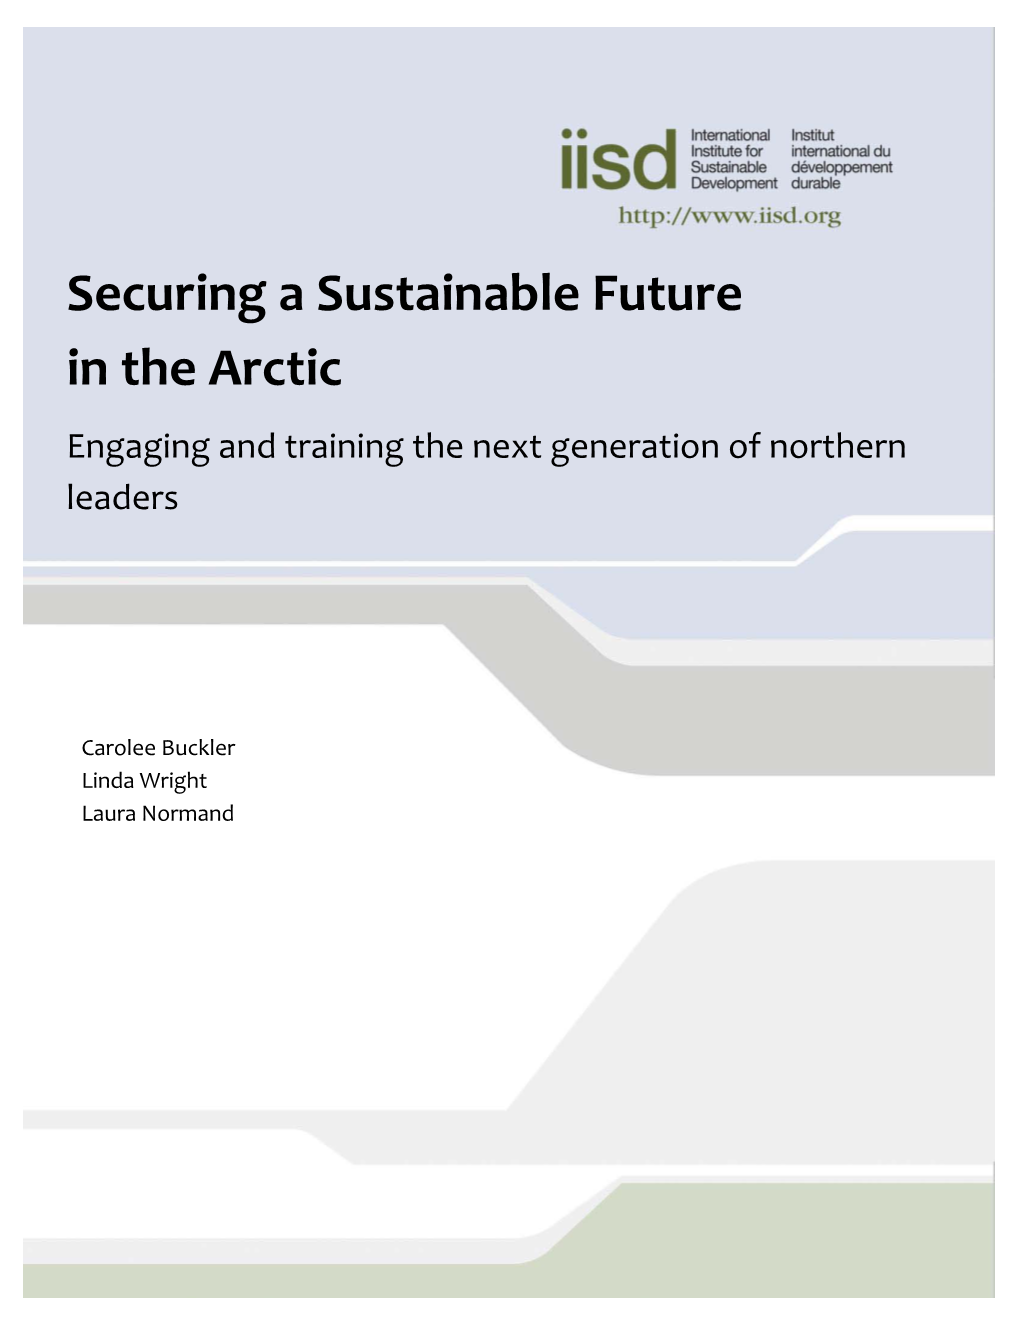 Securing a Sustainable Future in the Arctic